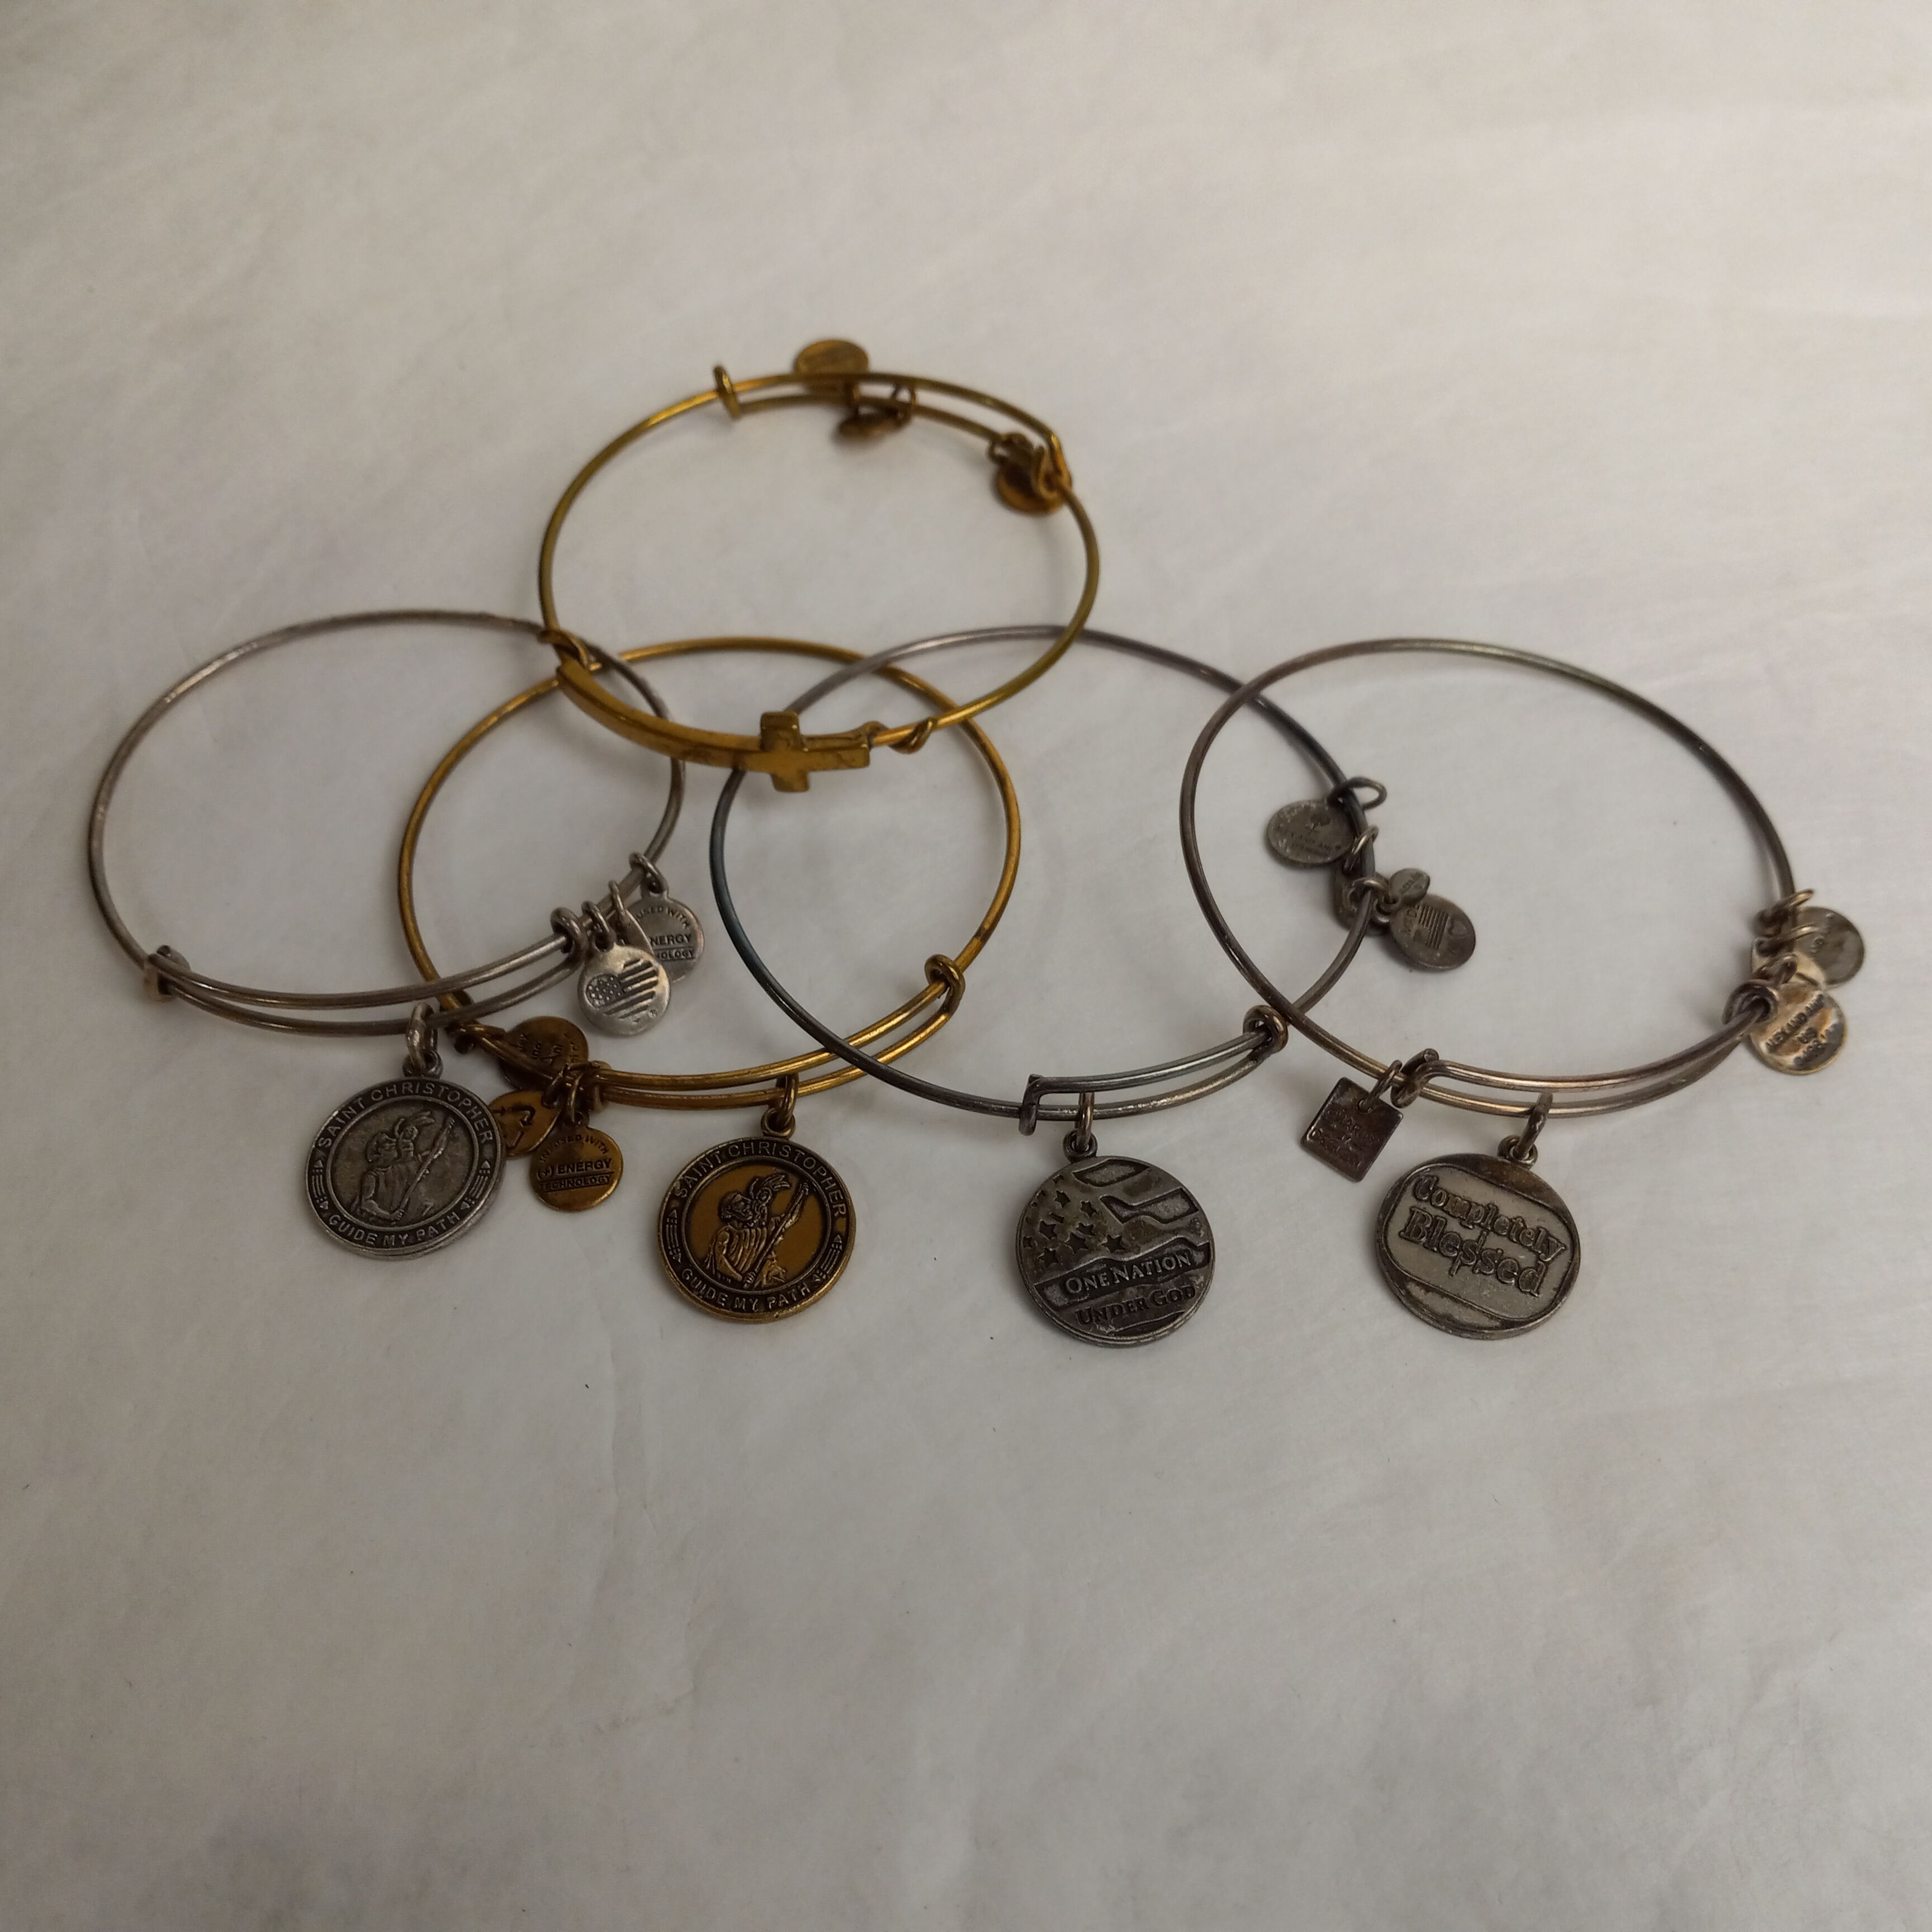 Vintage Gold Wax Seal Cross Charm Bracelet  Select Your Scripture   Clothed with Truth